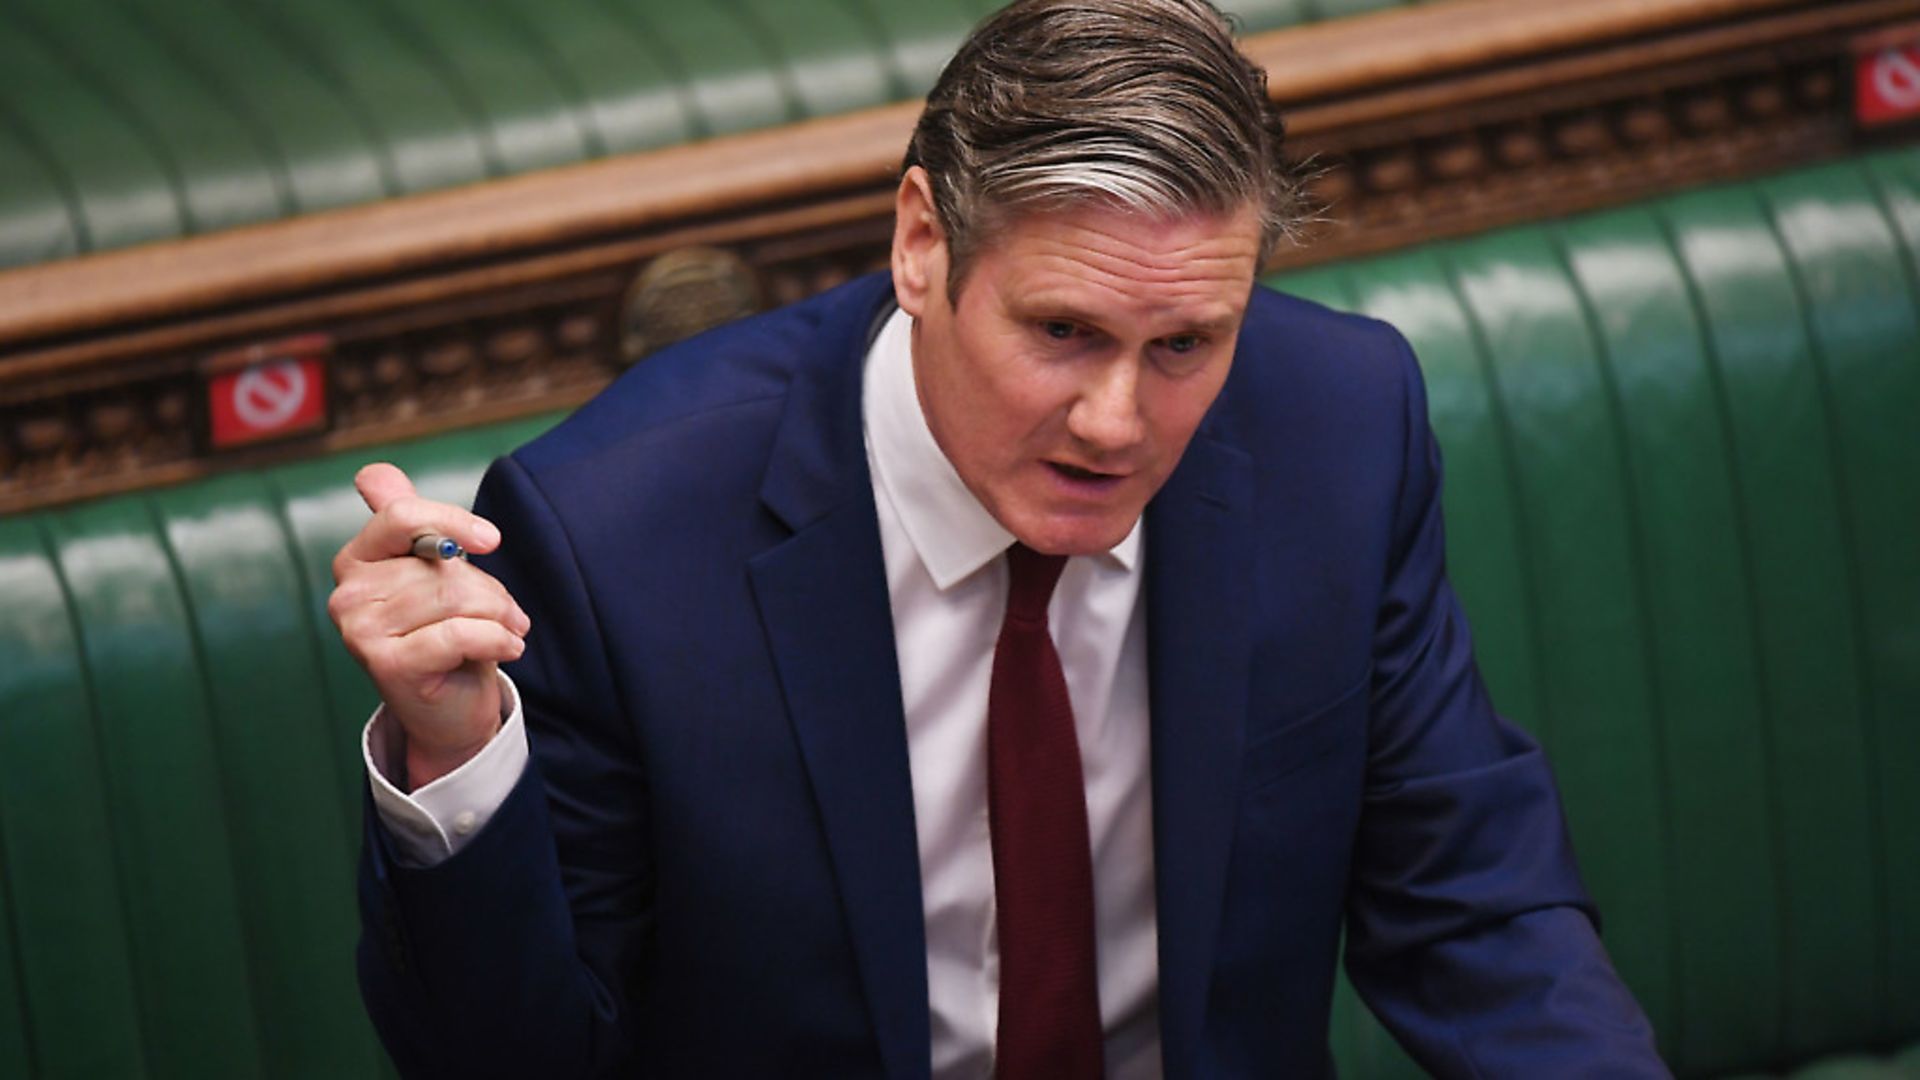 Labour leader Keir Starmer speaking during Prime Minister's Questions (UK Parliament/Jessica Taylor/PA Wire) - Credit: PA